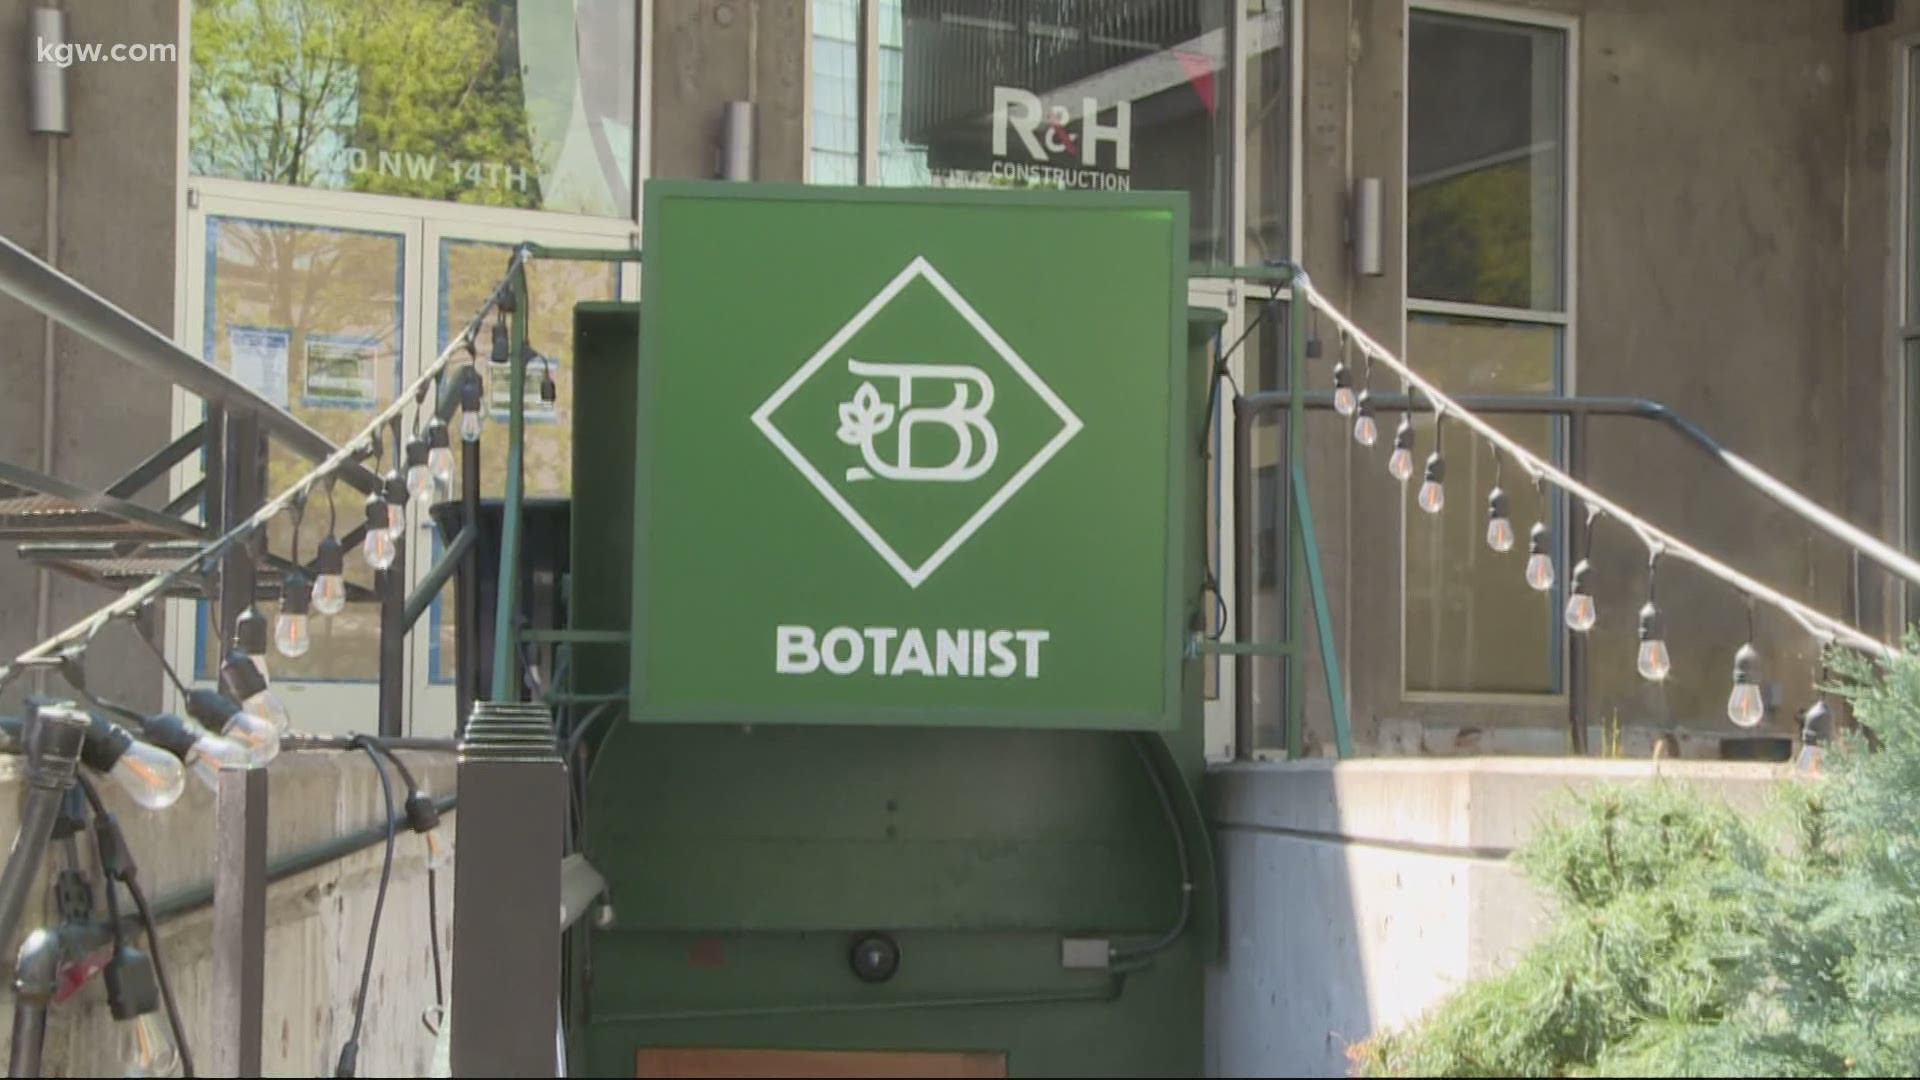 On the day before Thanksgiving, Botanist House is going to sell cocktails to go in protest of Oregon's constitution.